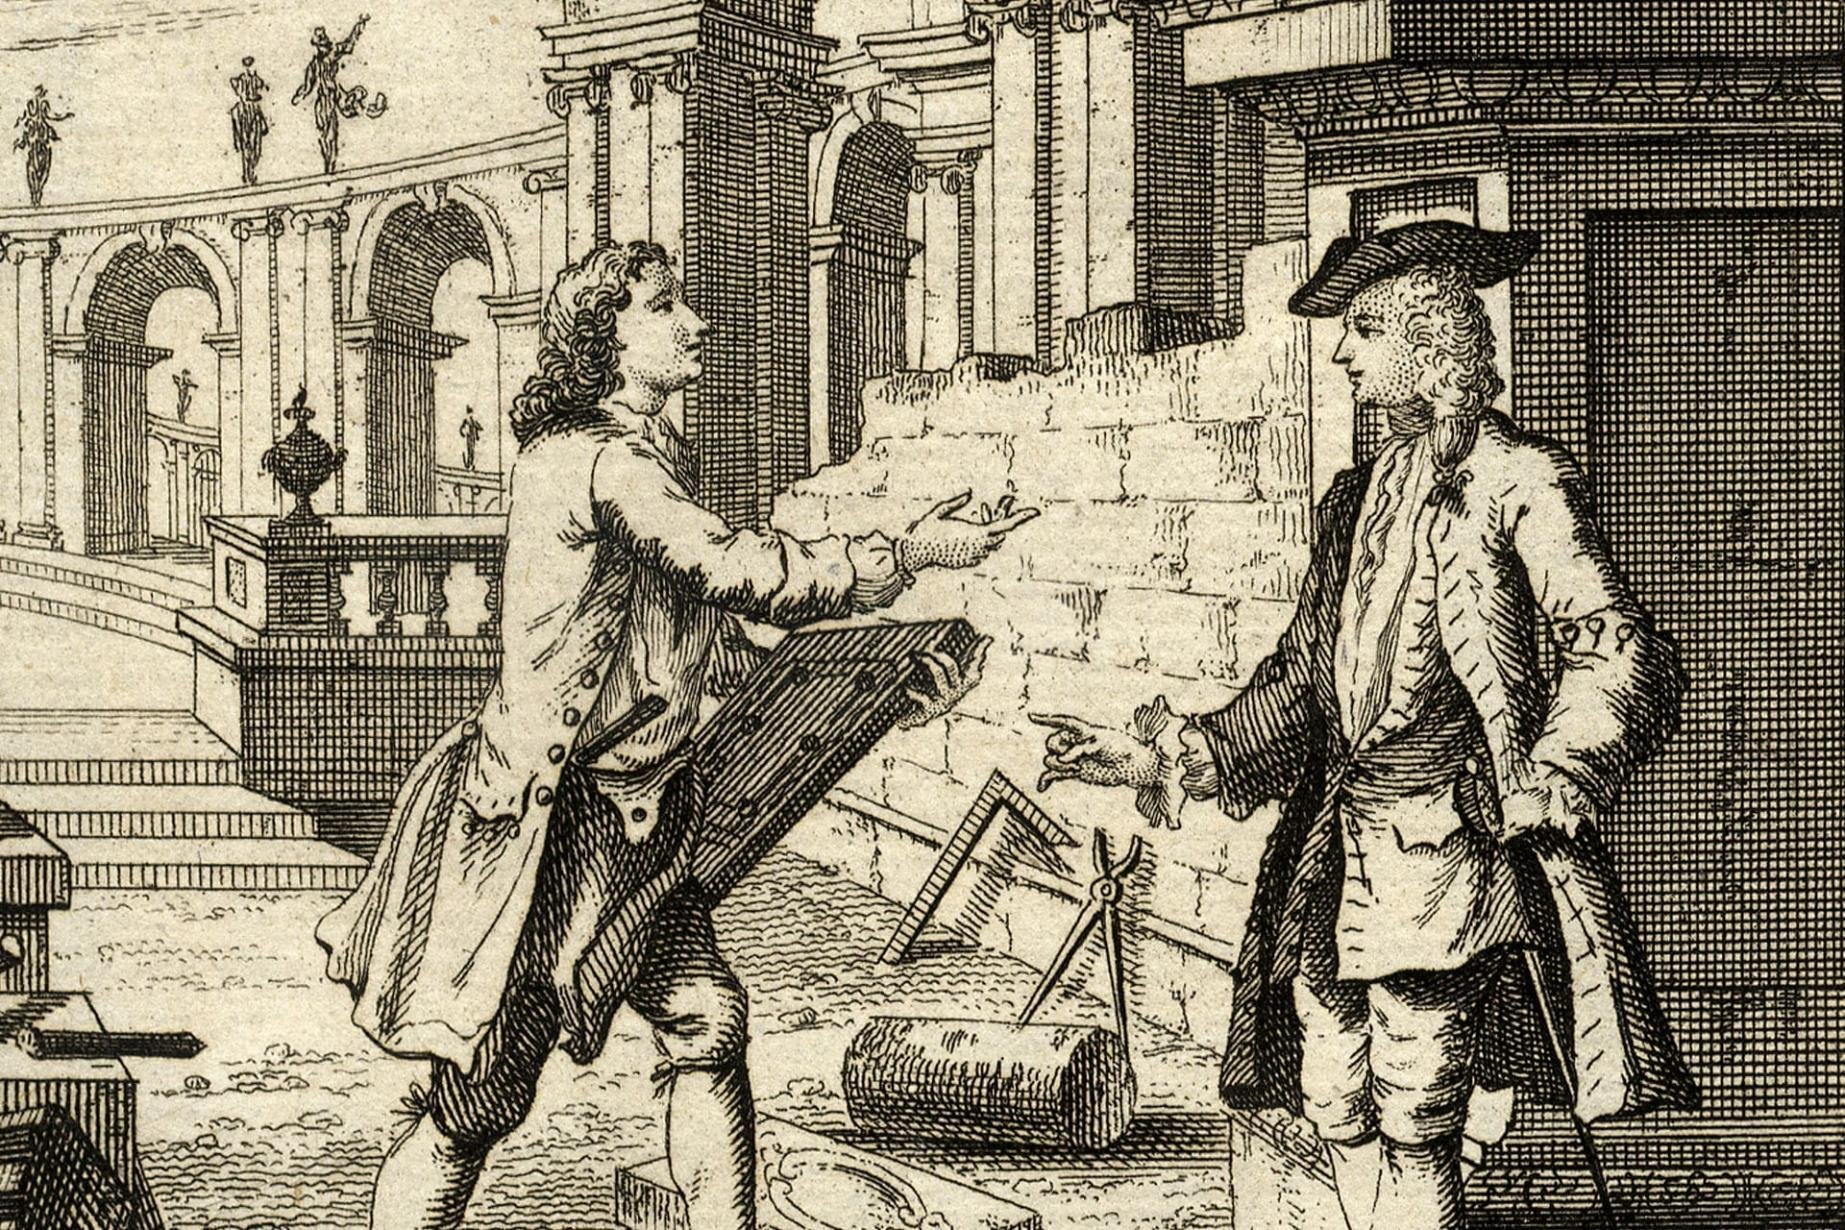 Detail from Frontpiece of The Builder’s Dictionary, 1734